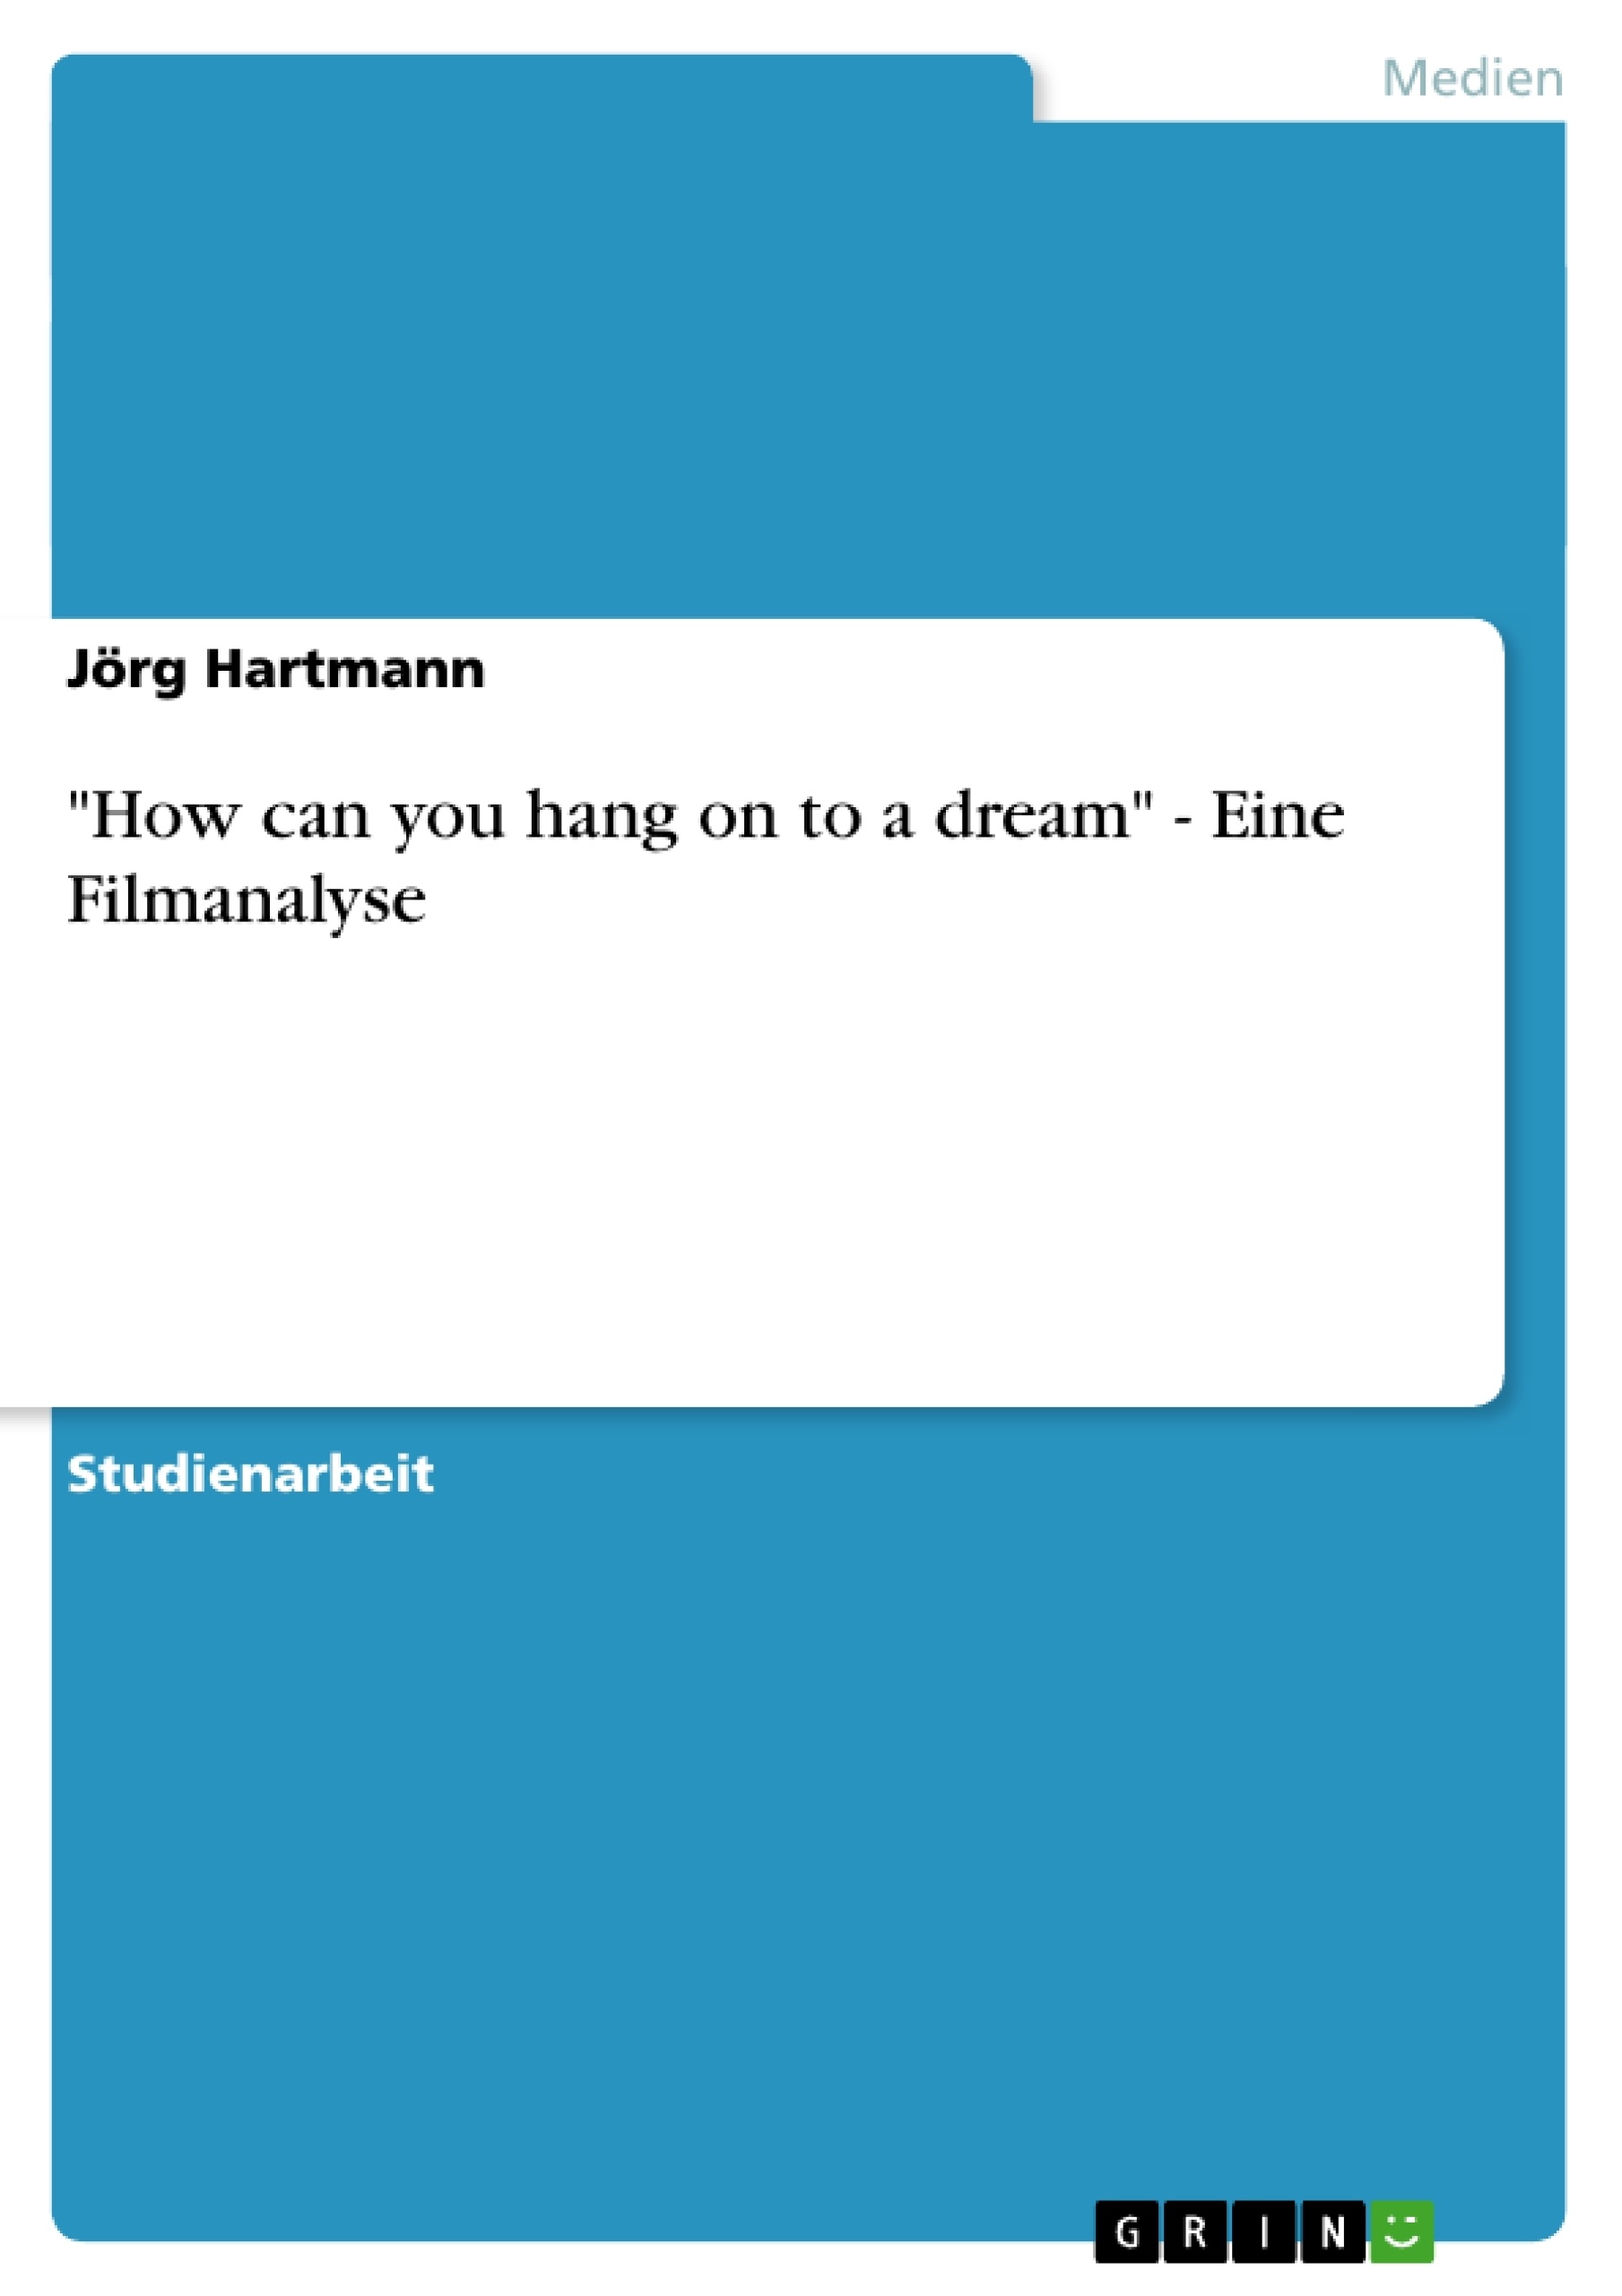 Titre: "How can you hang on to a dream" - Eine Filmanalyse